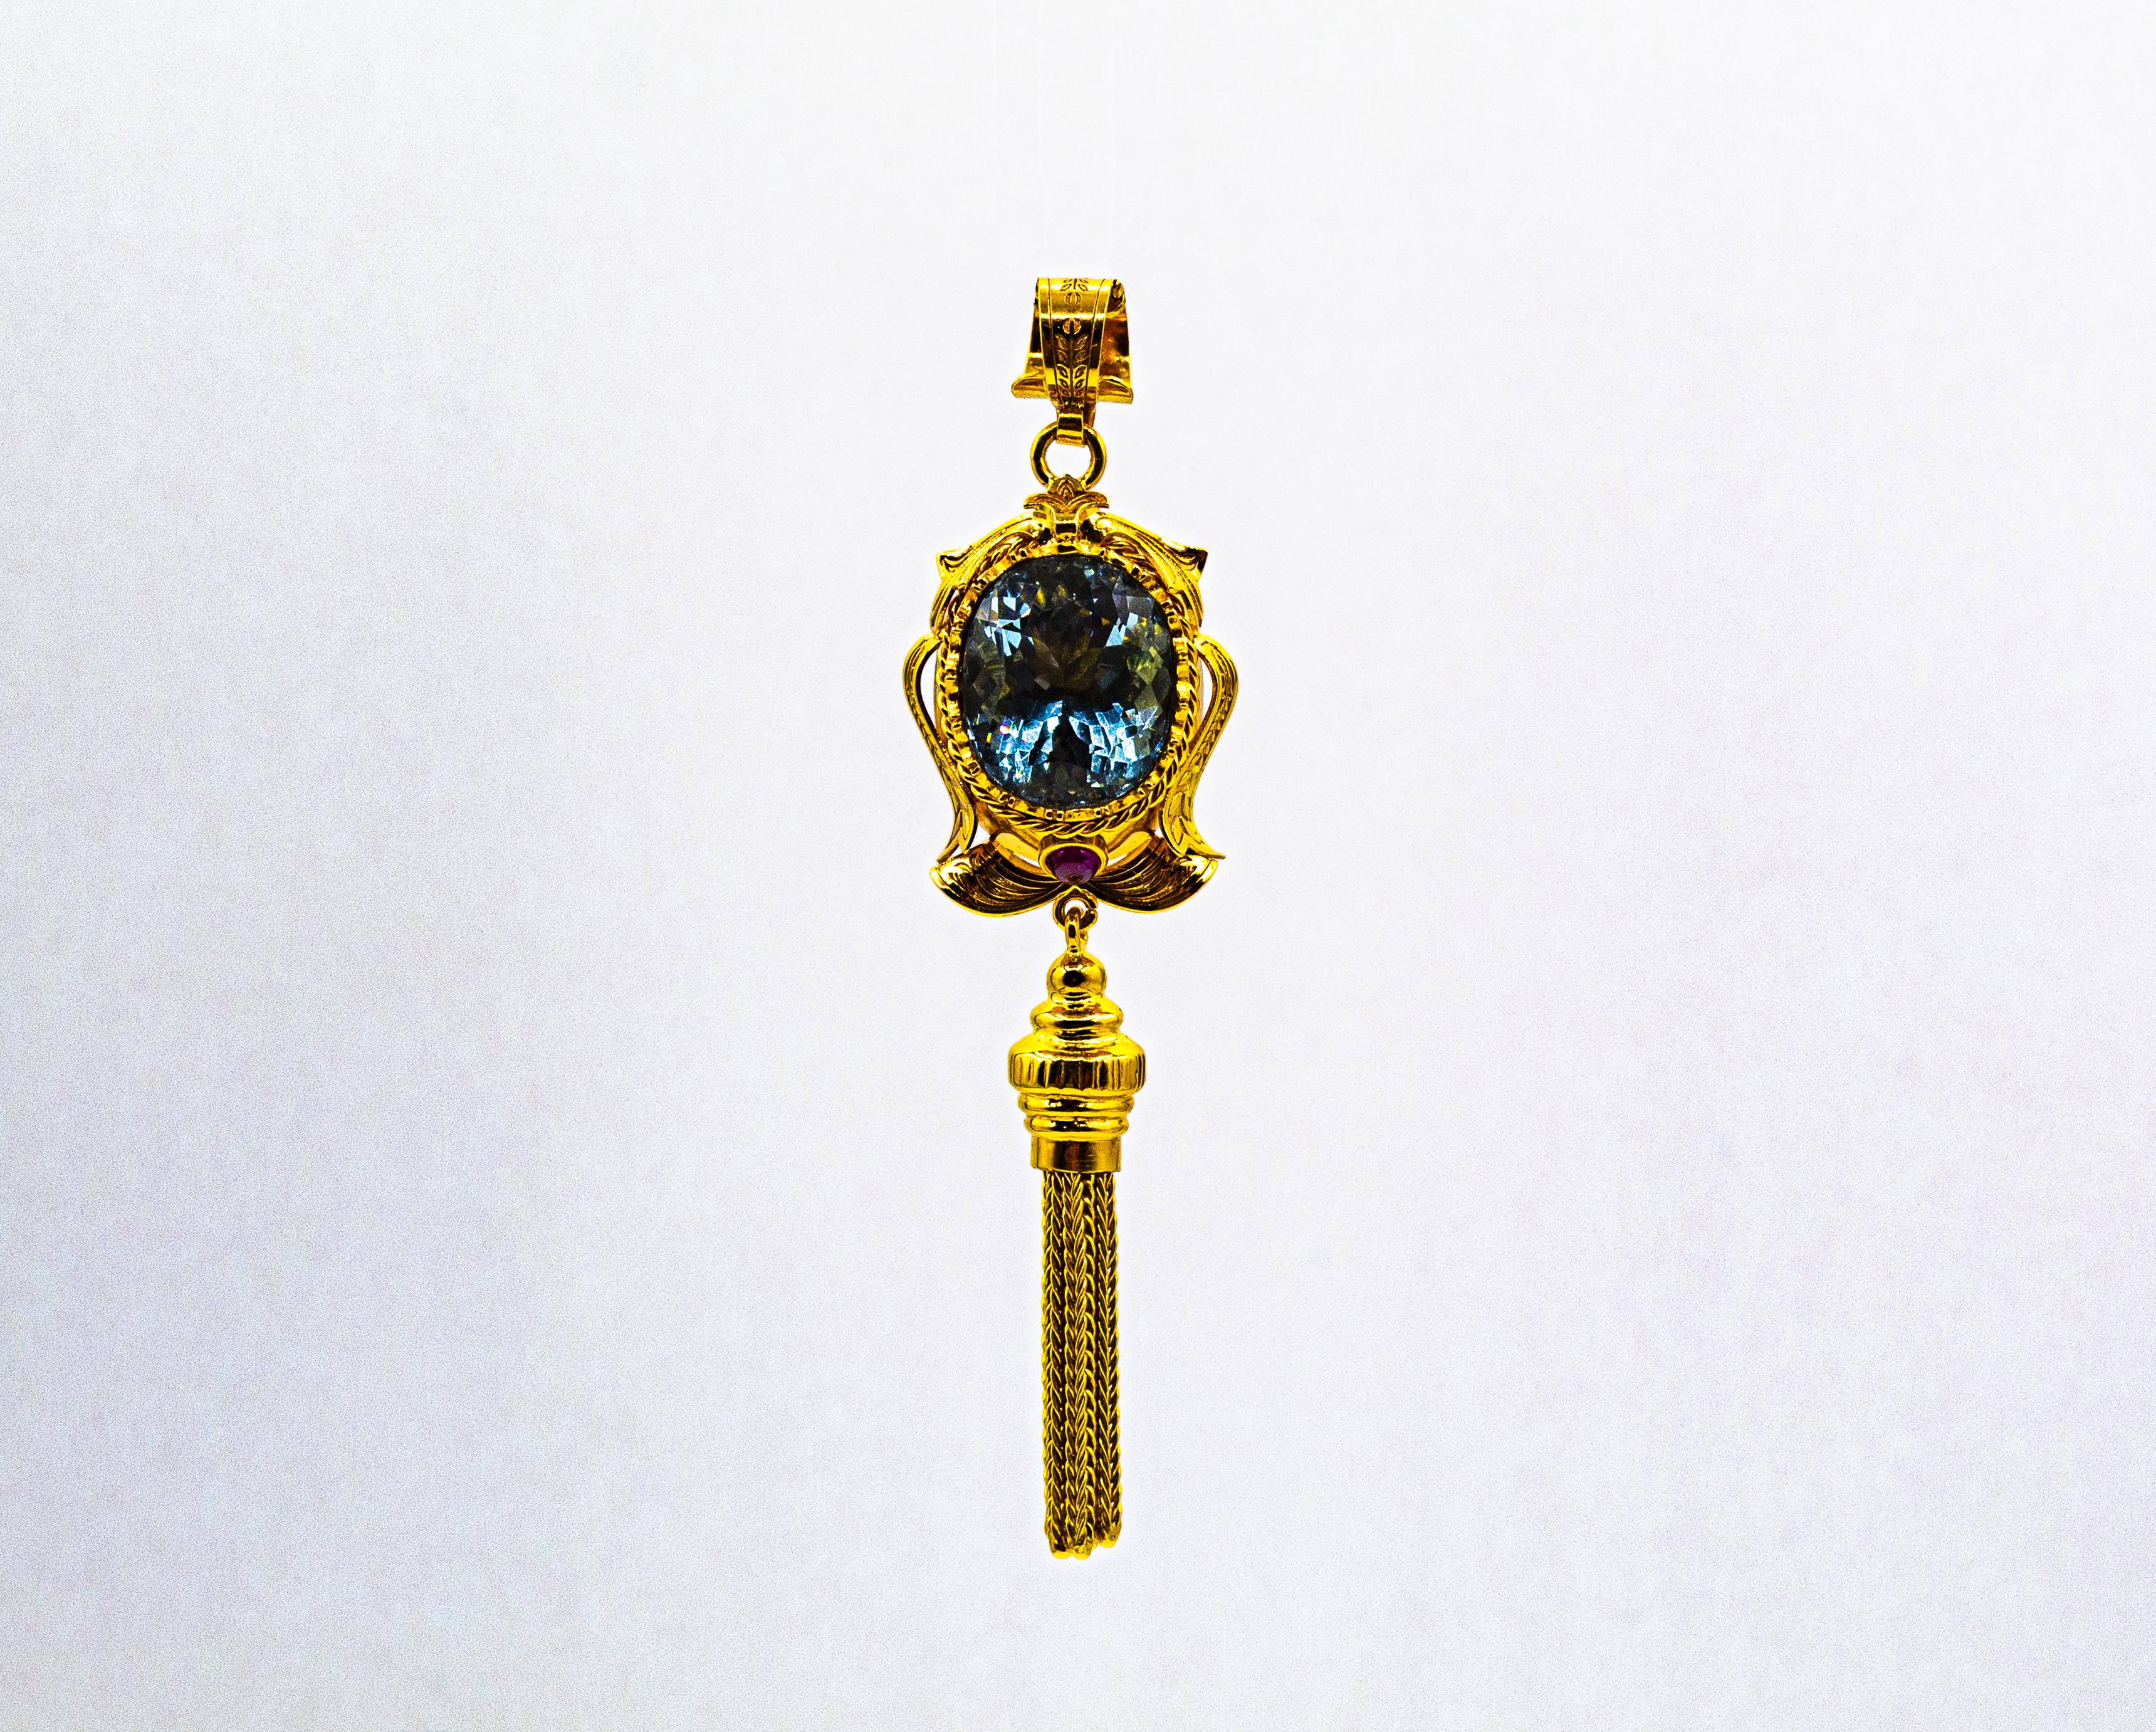 This Pendant is made of 9K Yellow Gold.
This Pendant has a 0.30 Carats Cabochon Cut Rubies.
This Pendant has a 8.00 Carats Blue Topaz.

We're a workshop so every piece is handmade, customizable and resizable.
